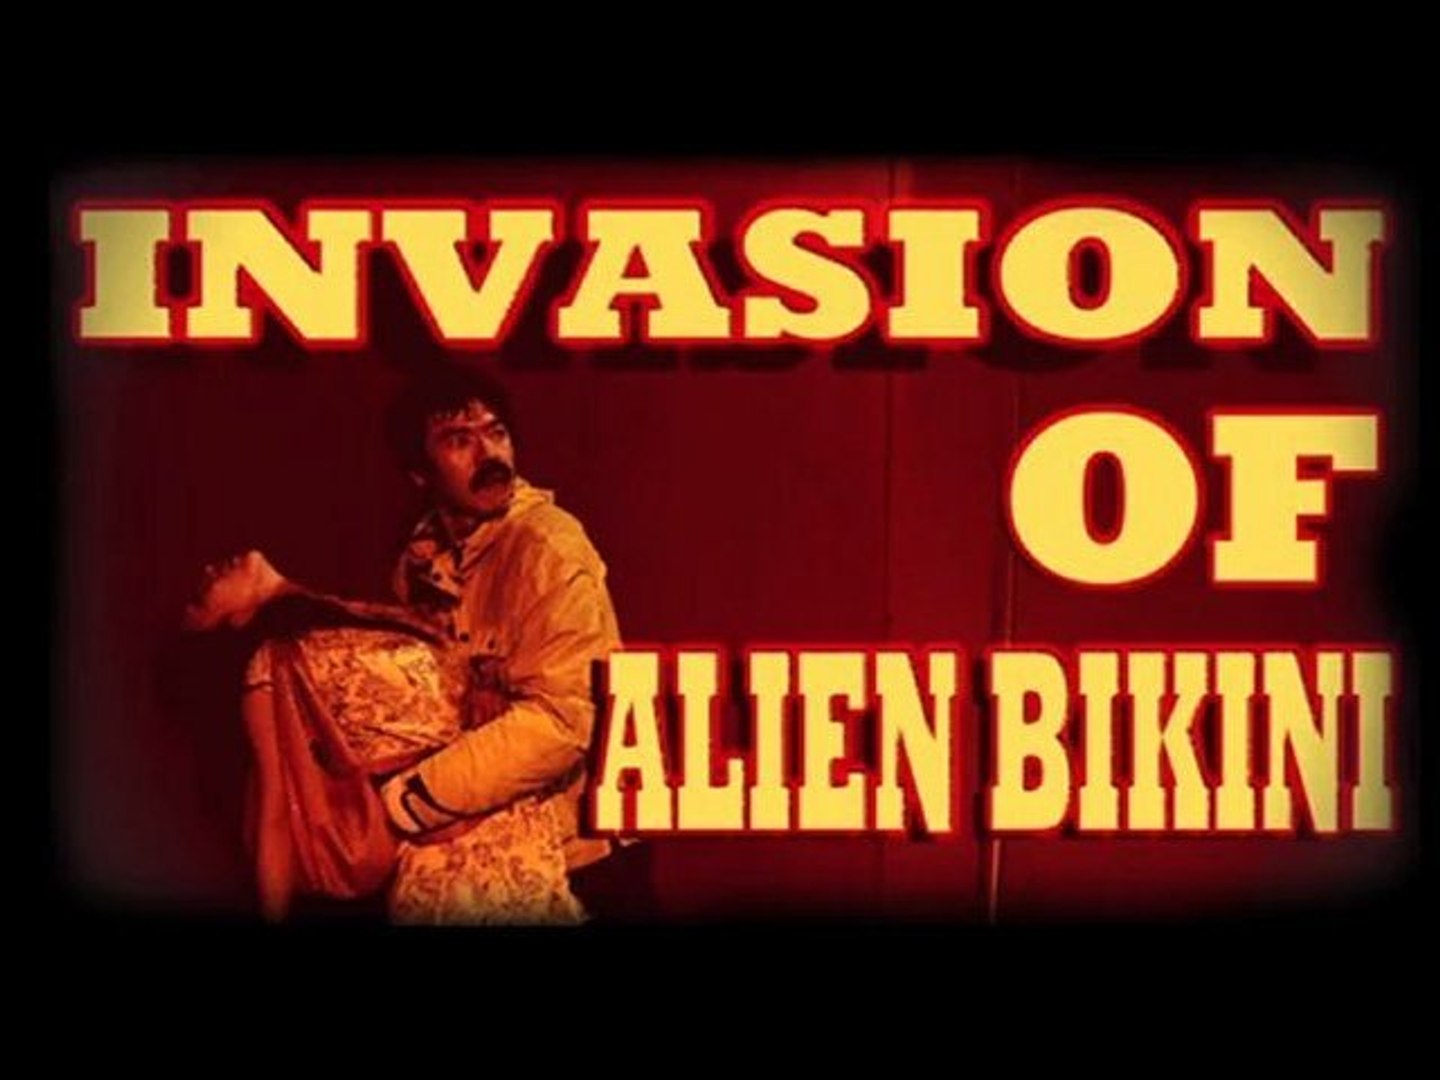 charlie buckland recommends invasion of alien bikini pic